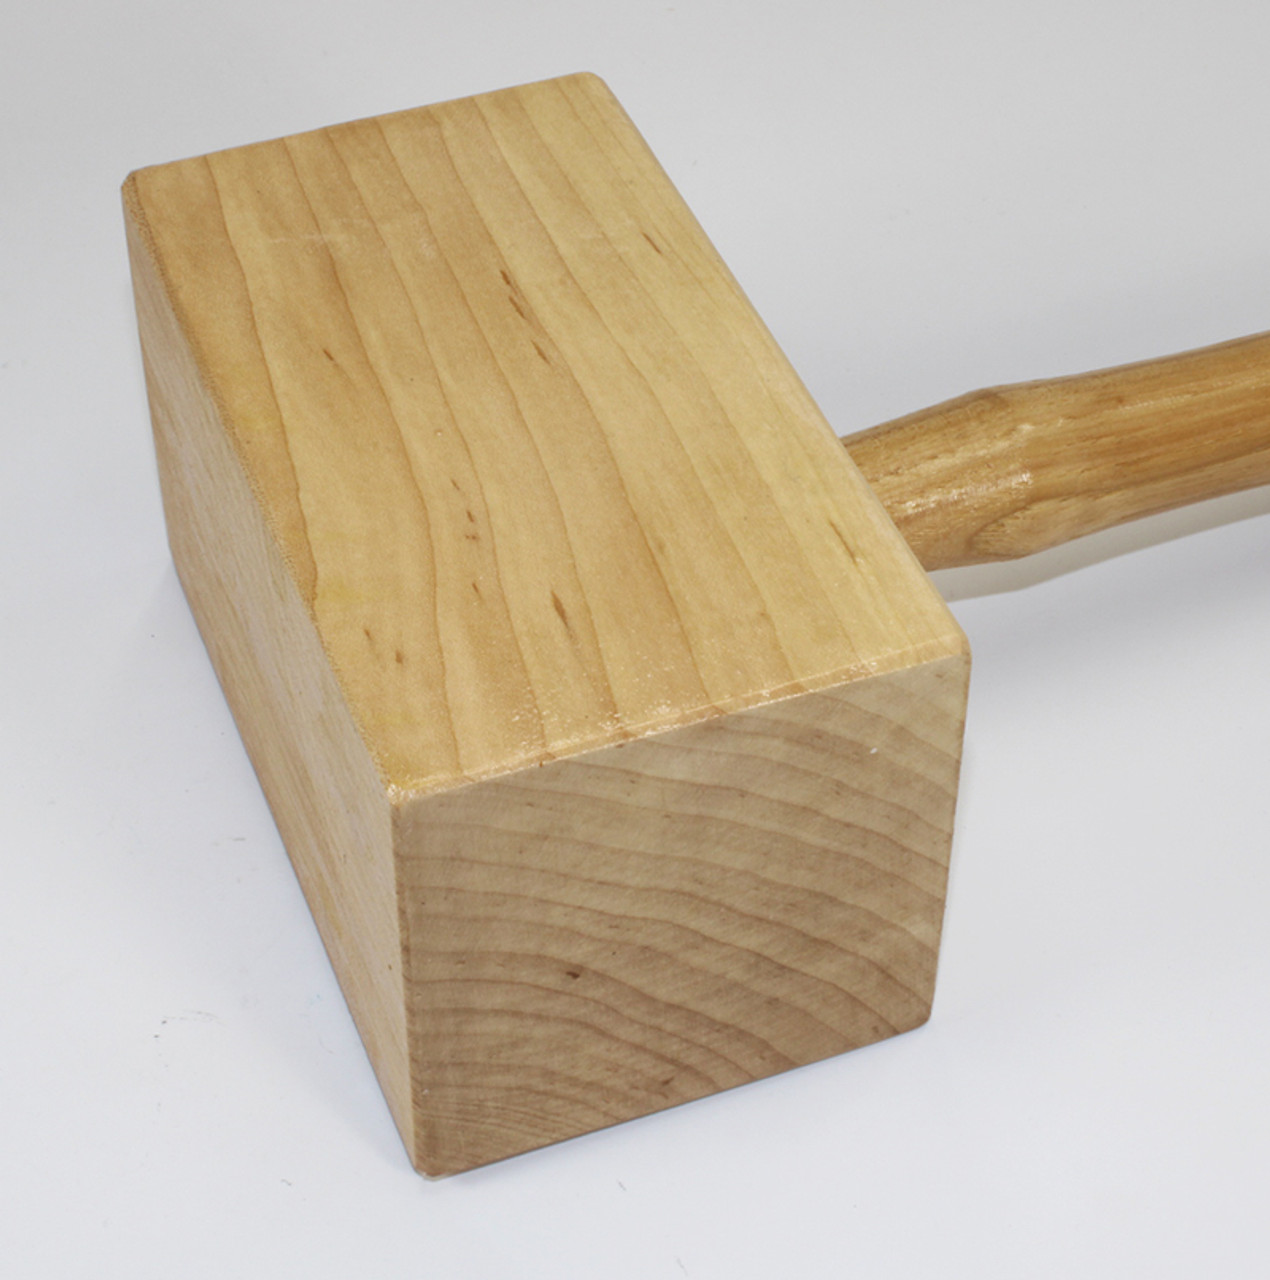 3 1/2" Square Solid Wood Mallet